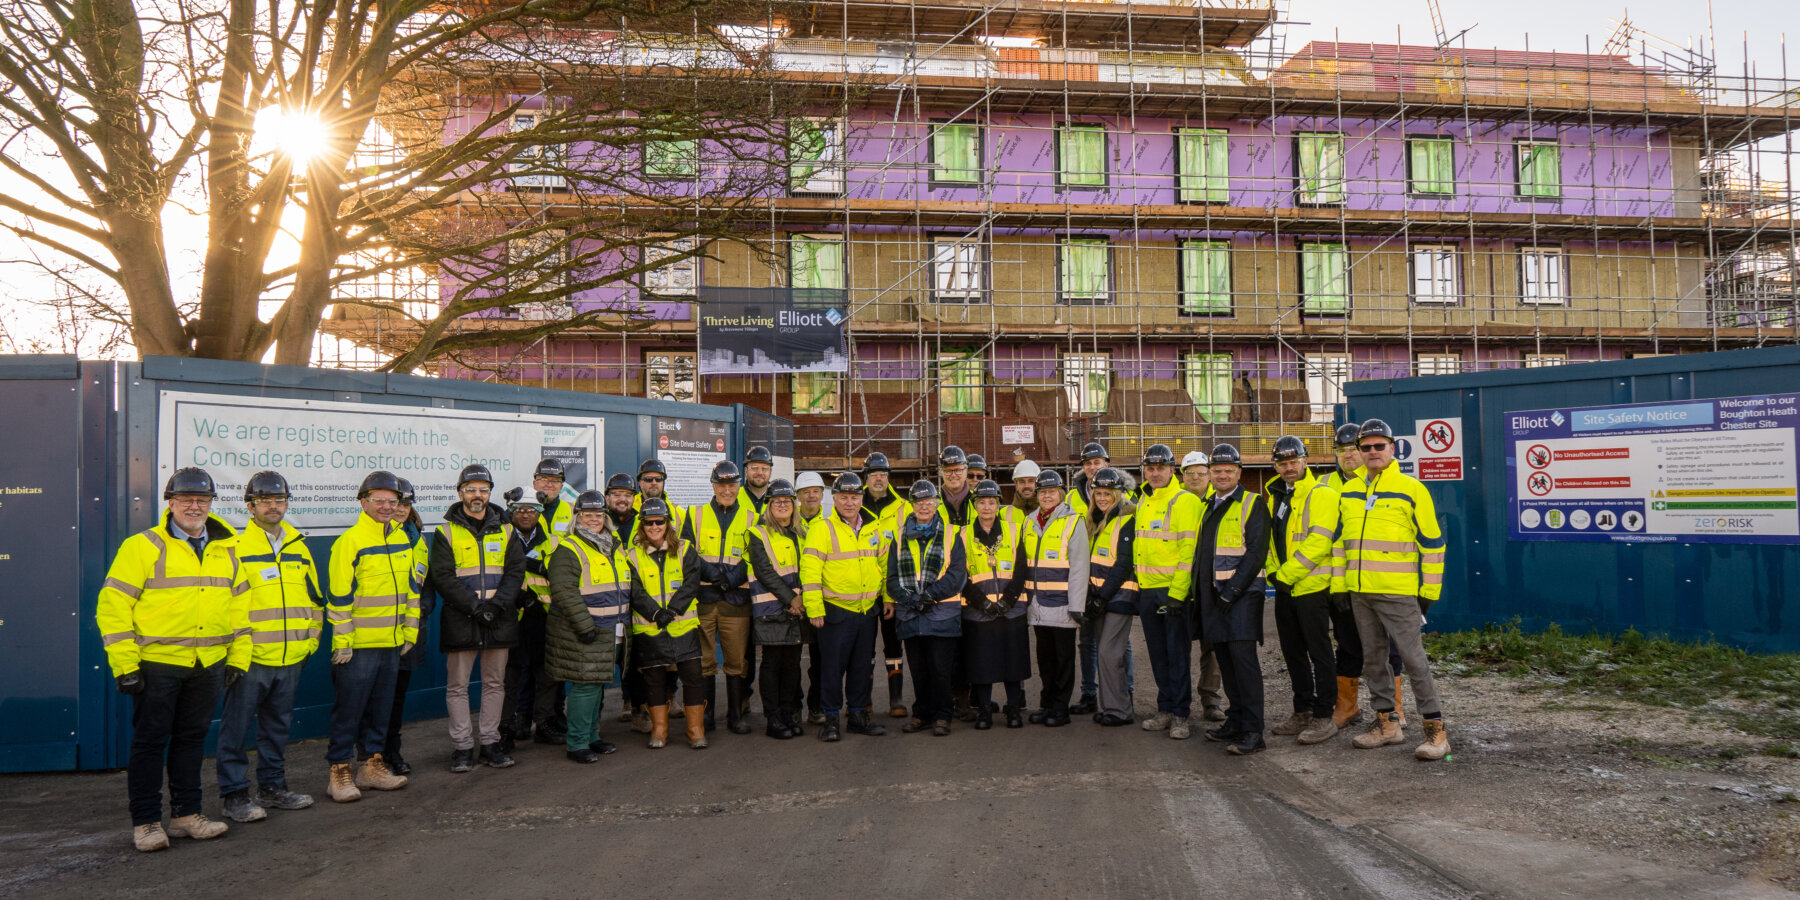 The Wyldewoods, Chester Elliott Group Topping Out Feature Image